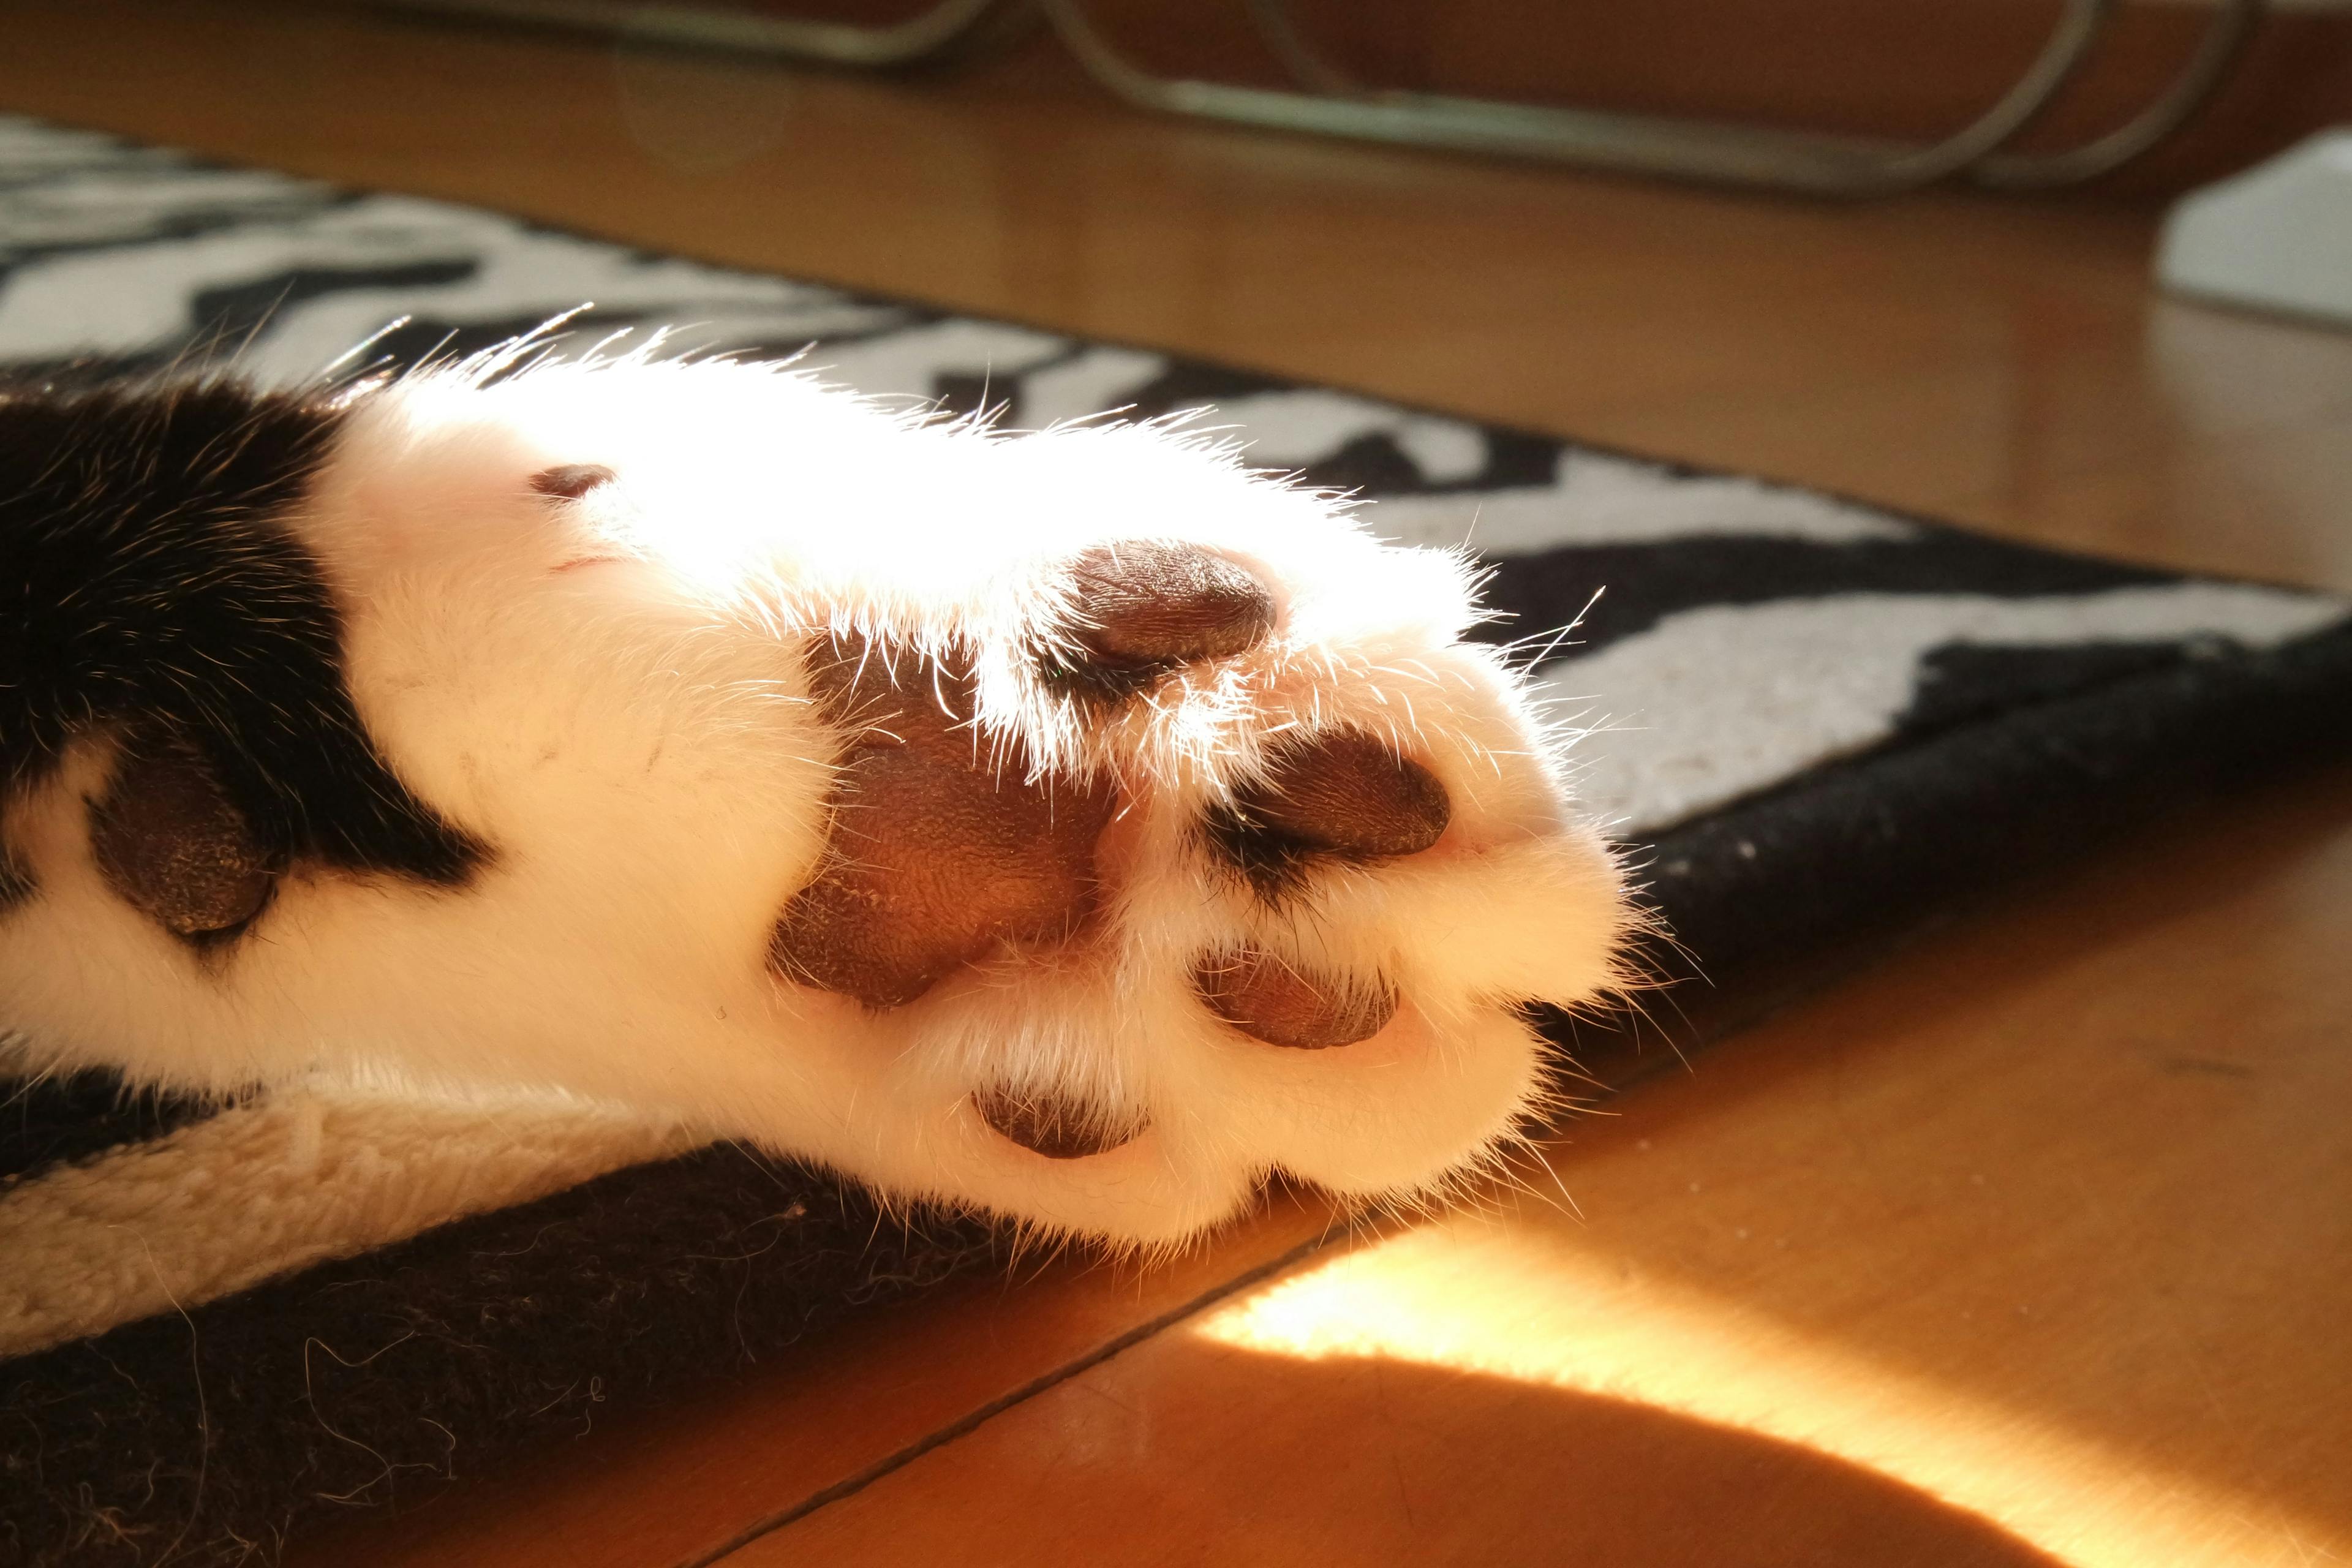 a close up of a cat's paw on a rug